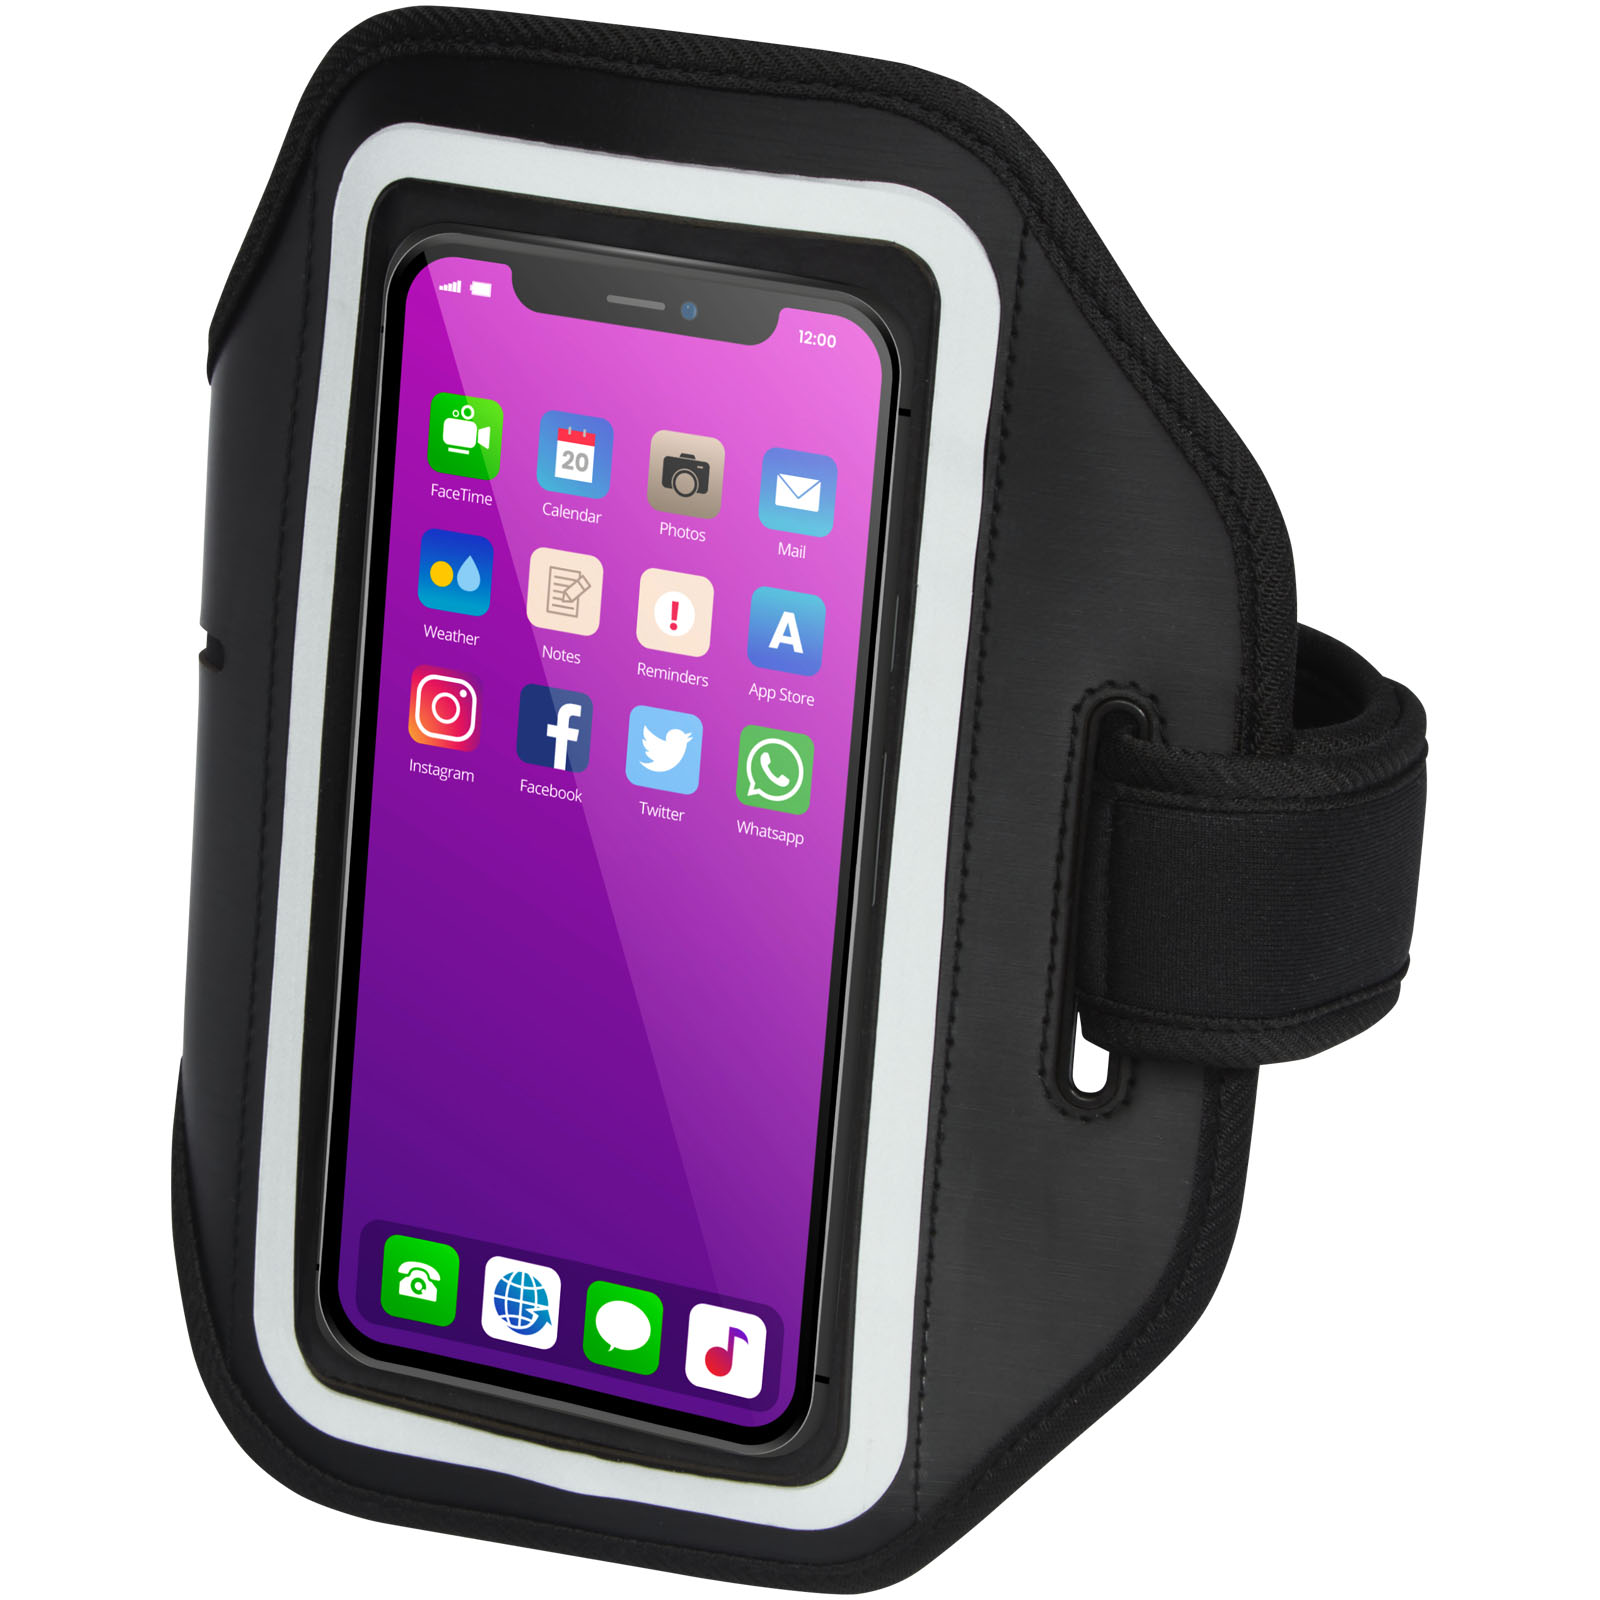 Advertising Telephone & Tablet Accessories - Haile reflective smartphone bracelet with transparent cover